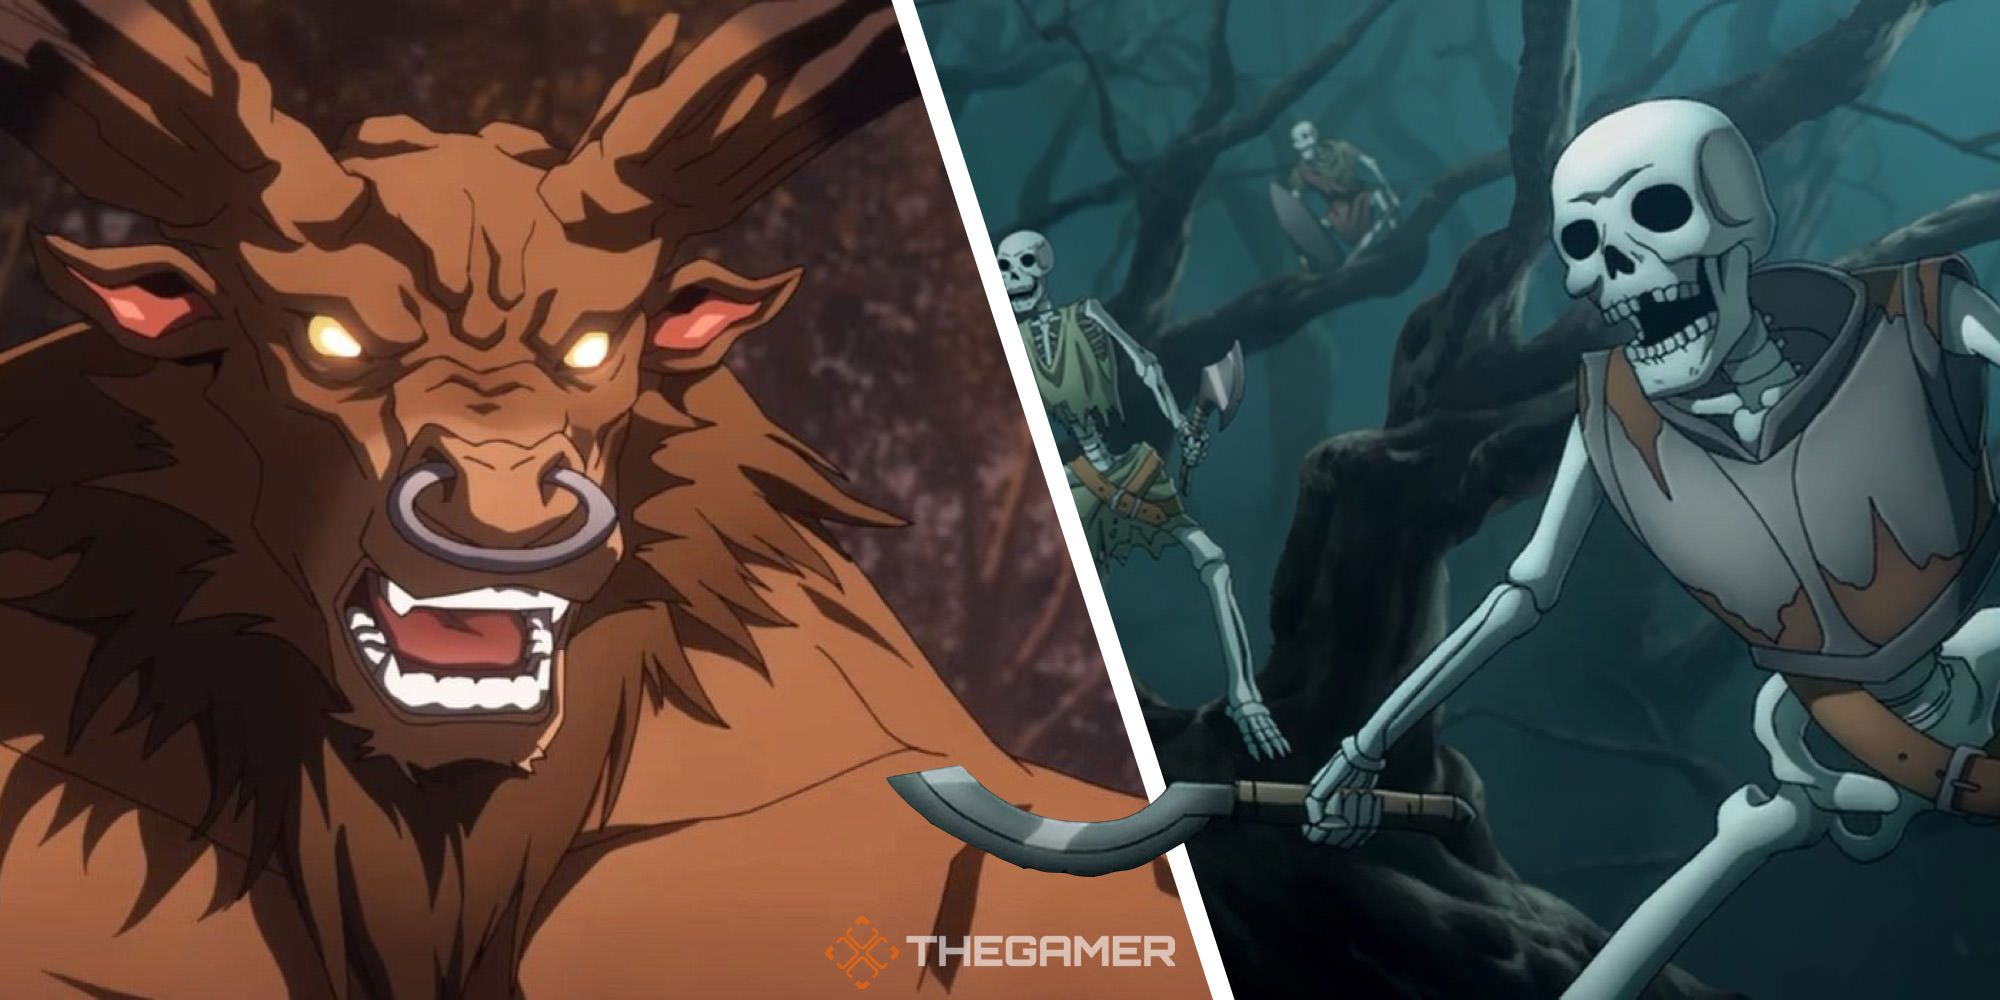 All Classic Castlevania Monsters In The Netflix Adaptation